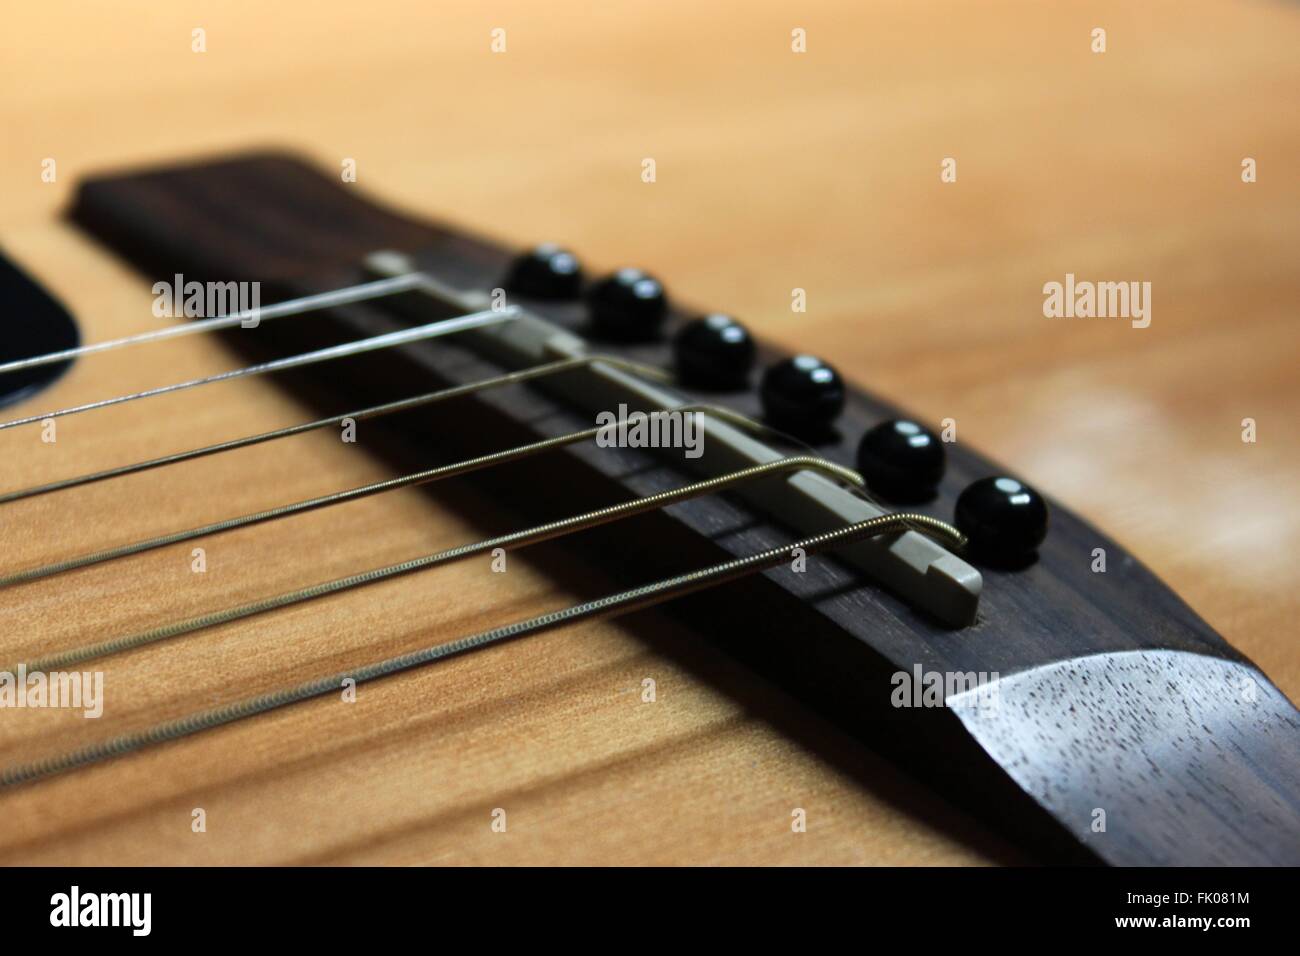 close up view of acoustic guitar strings and bridge Stock Photo - Alamy